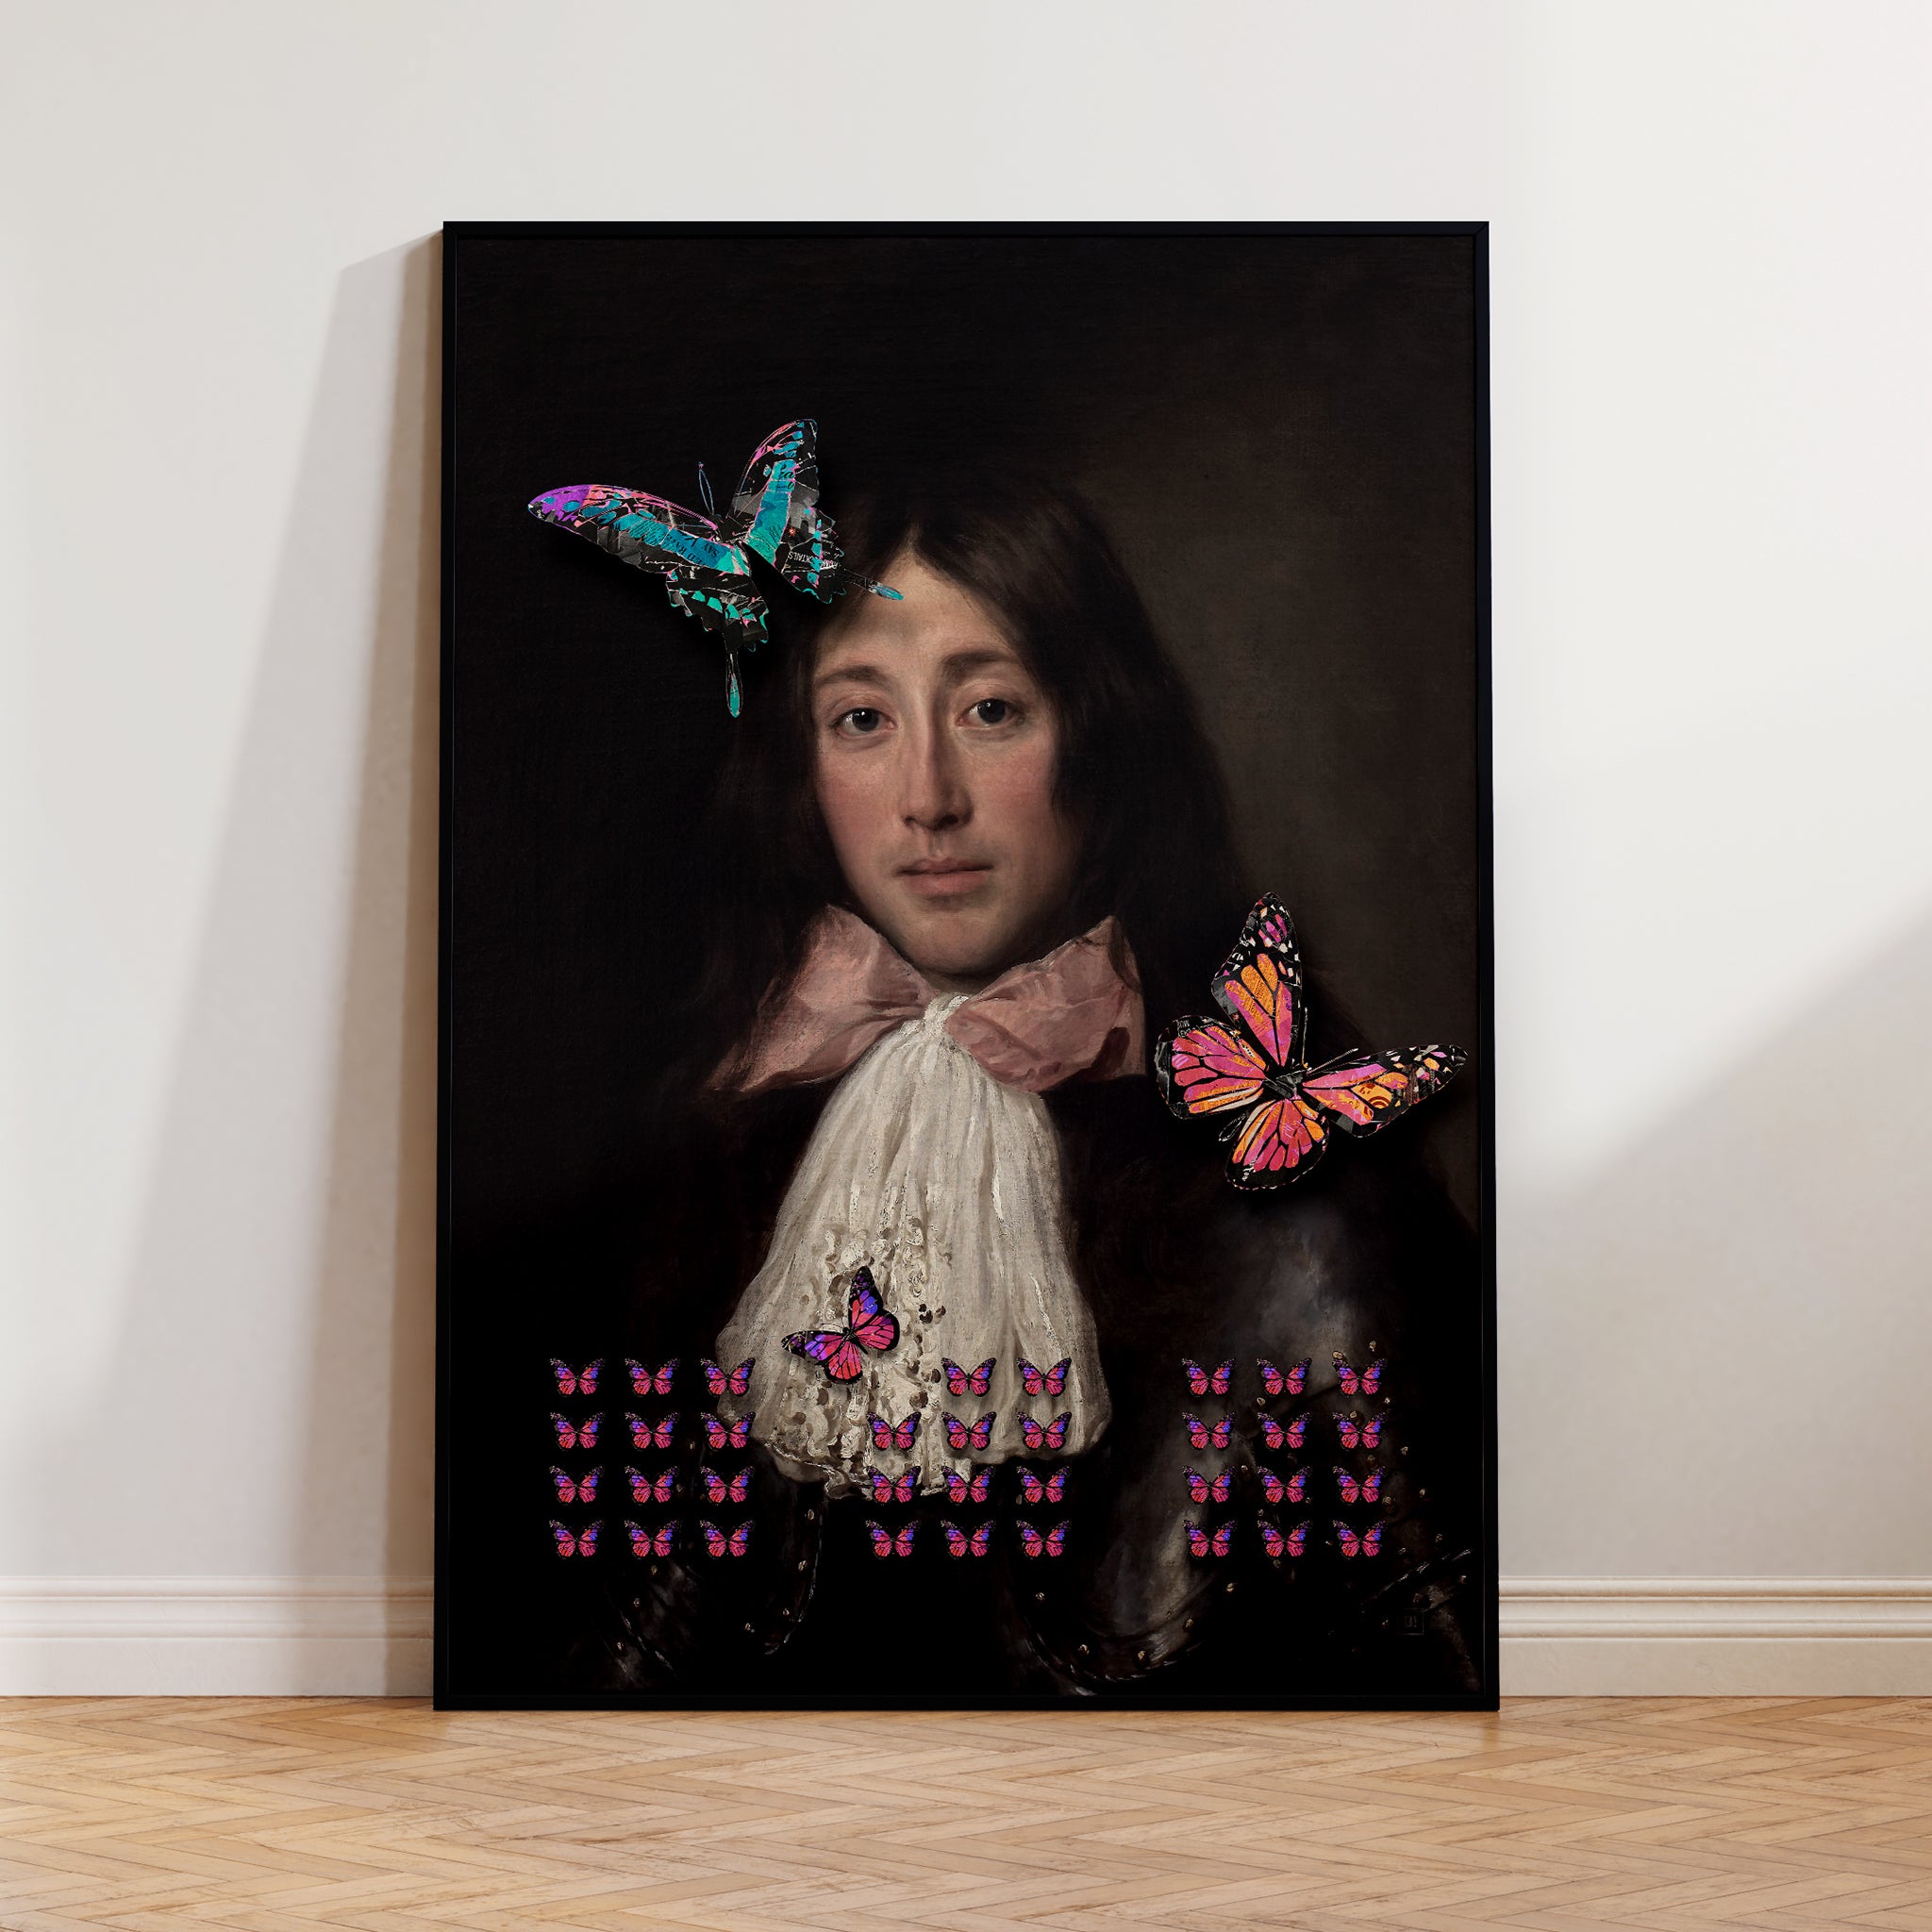 Be inspired by our altered soldier with pink tie and butterflies art print. This artwork was printed using the giclée process on archival acid-free paper and is presented in a modern black frame that captures its timeless beauty in every detail.